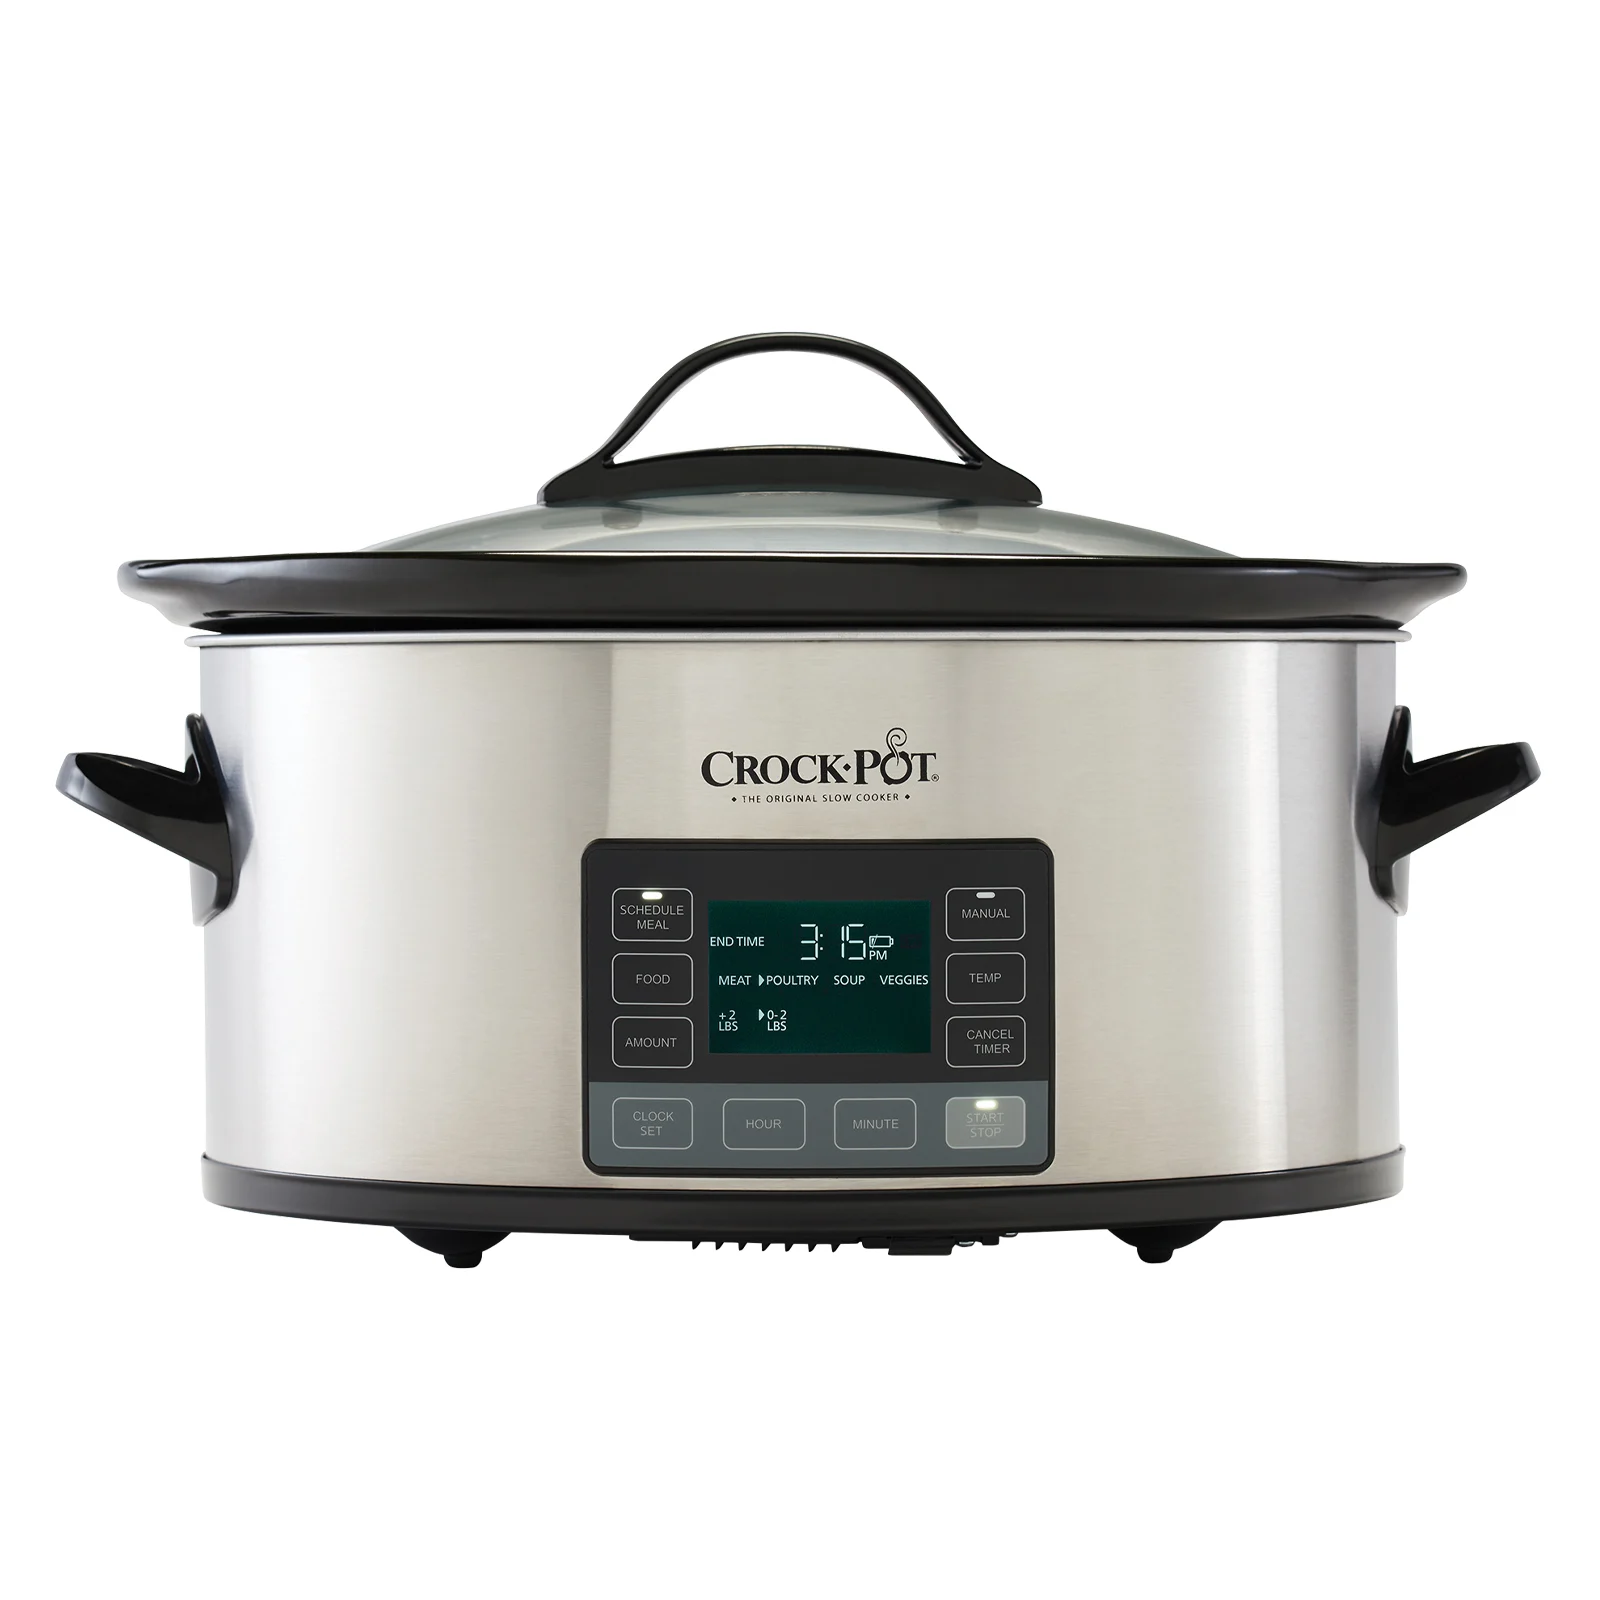 A slow cooker 